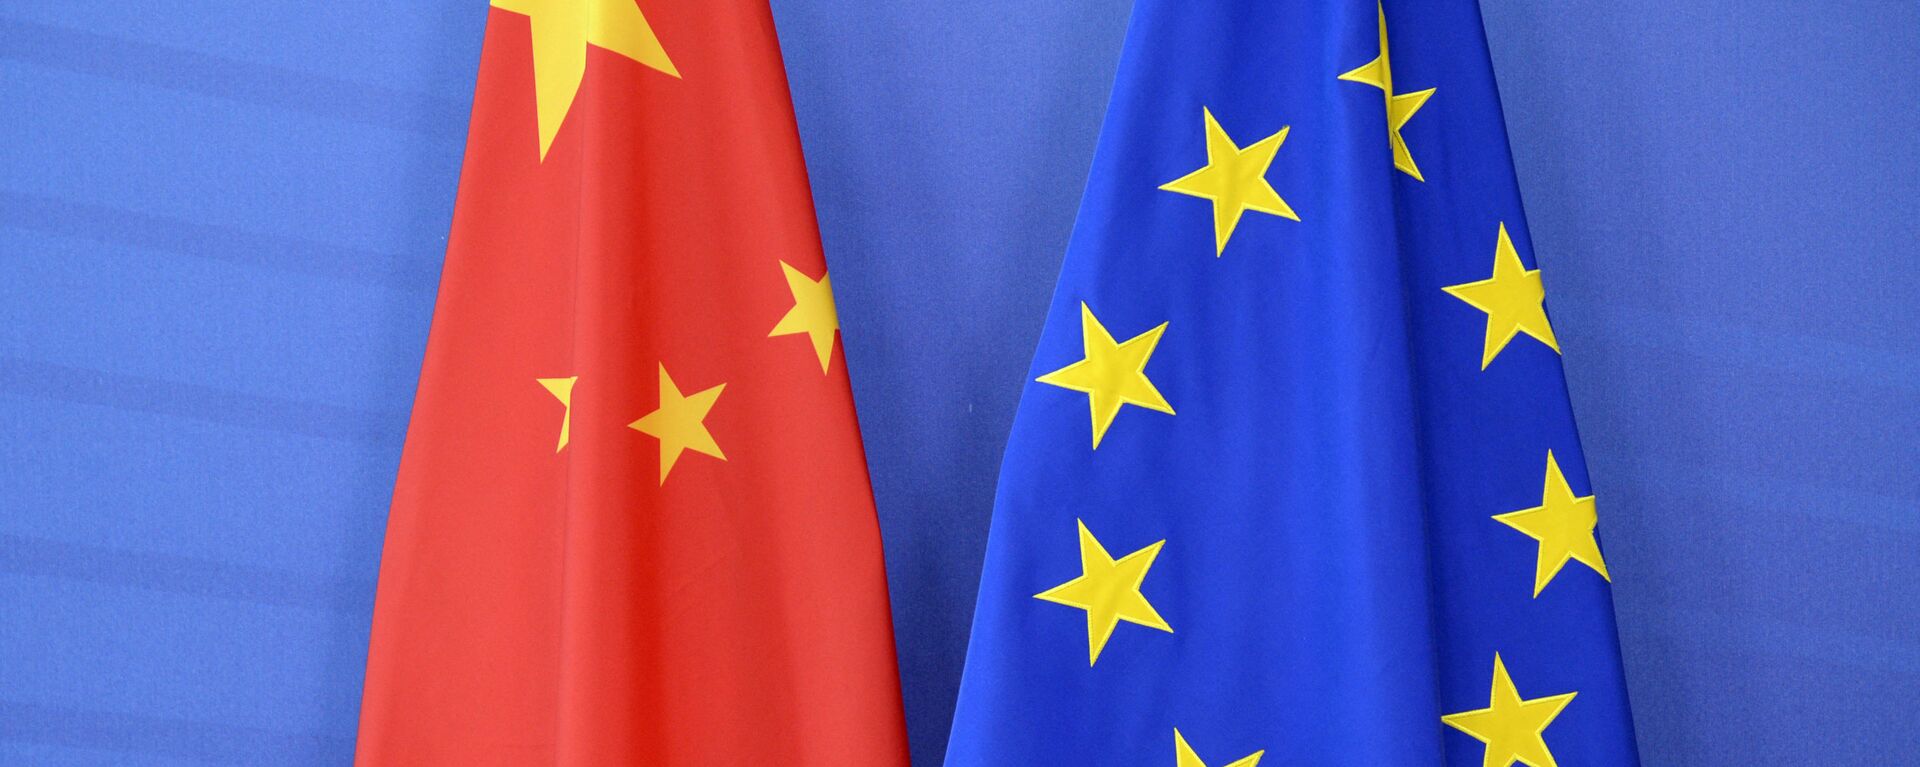 The Chinese flag(L) is draped beside the European Union (EU) during an EU- China Summit at the European Union Commission headquarters in Brussels on June 29, 2015 - Sputnik International, 1920, 08.06.2023